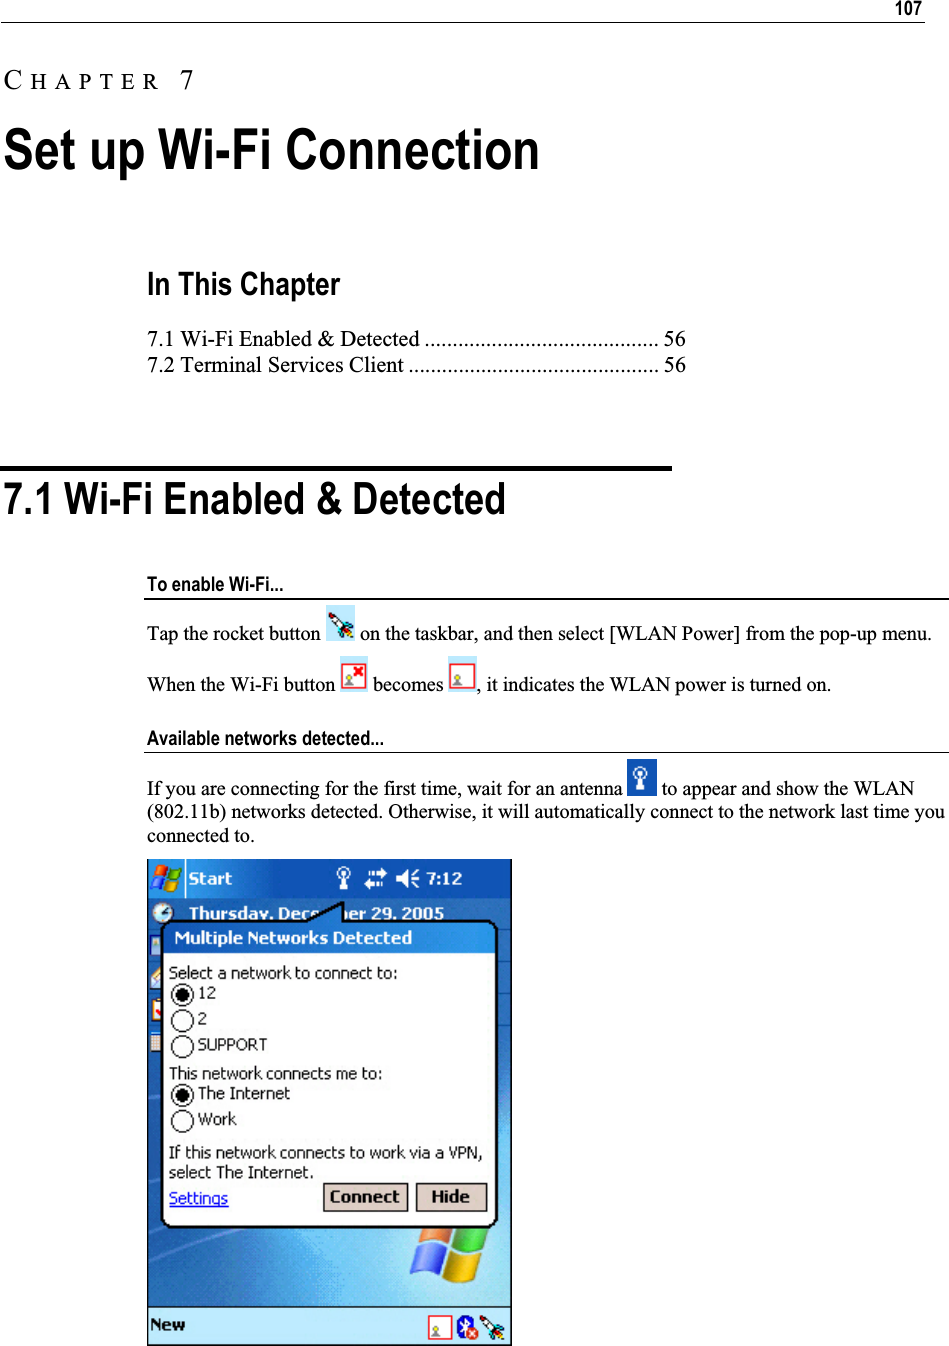 107In This Chapter 7.1 Wi-Fi Enabled &amp; Detected .......................................... 56 7.2 Terminal Services Client ............................................. 56 7.1 Wi-Fi Enabled &amp; Detected To enable Wi-Fi... Tap the rocket button   on the taskbar, and then select [WLAN Power] from the pop-up menu. When the Wi-Fi button   becomes  , it indicates the WLAN power is turned on. Available networks detected... If you are connecting for the first time, wait for an antenna   to appear and show the WLAN (802.11b) networks detected. Otherwise, it will automatically connect to the network last time you connected to. CHAPTER 7Set up Wi-Fi Connection 